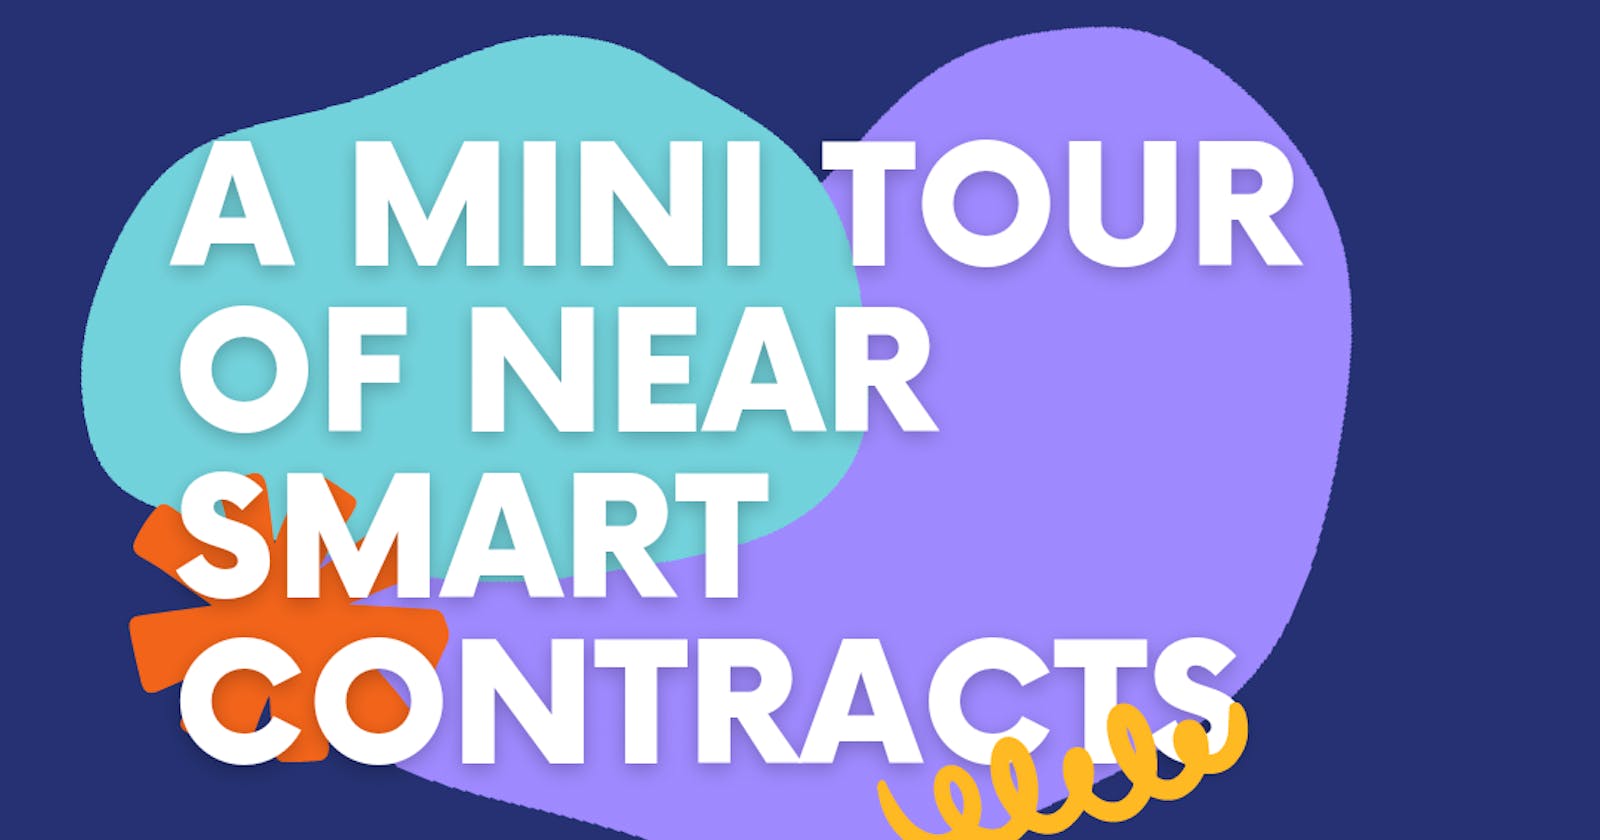 Near smart contracts